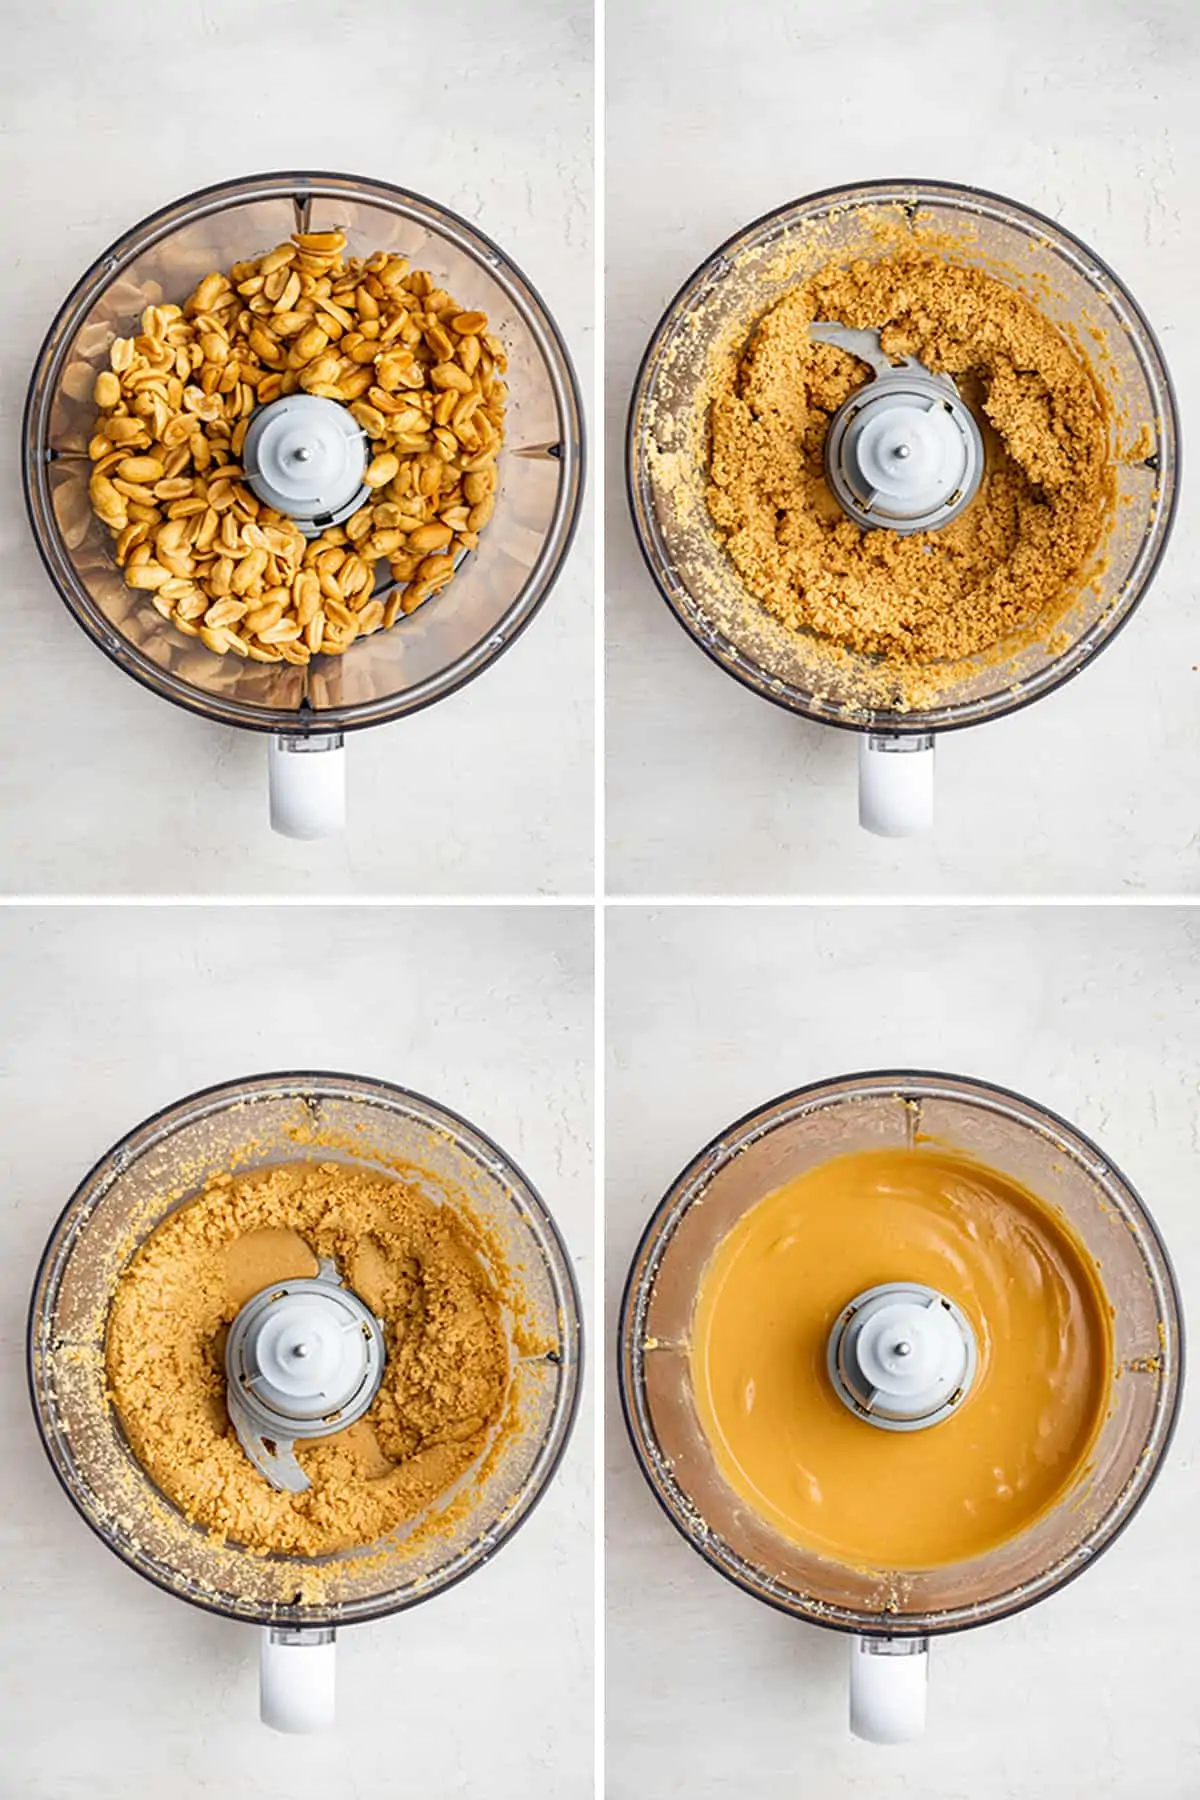 A food processor filled with honey roasted peanuts at four different stages of blending: unblended, coarsely blended, smooth but with some chunks, and creamy